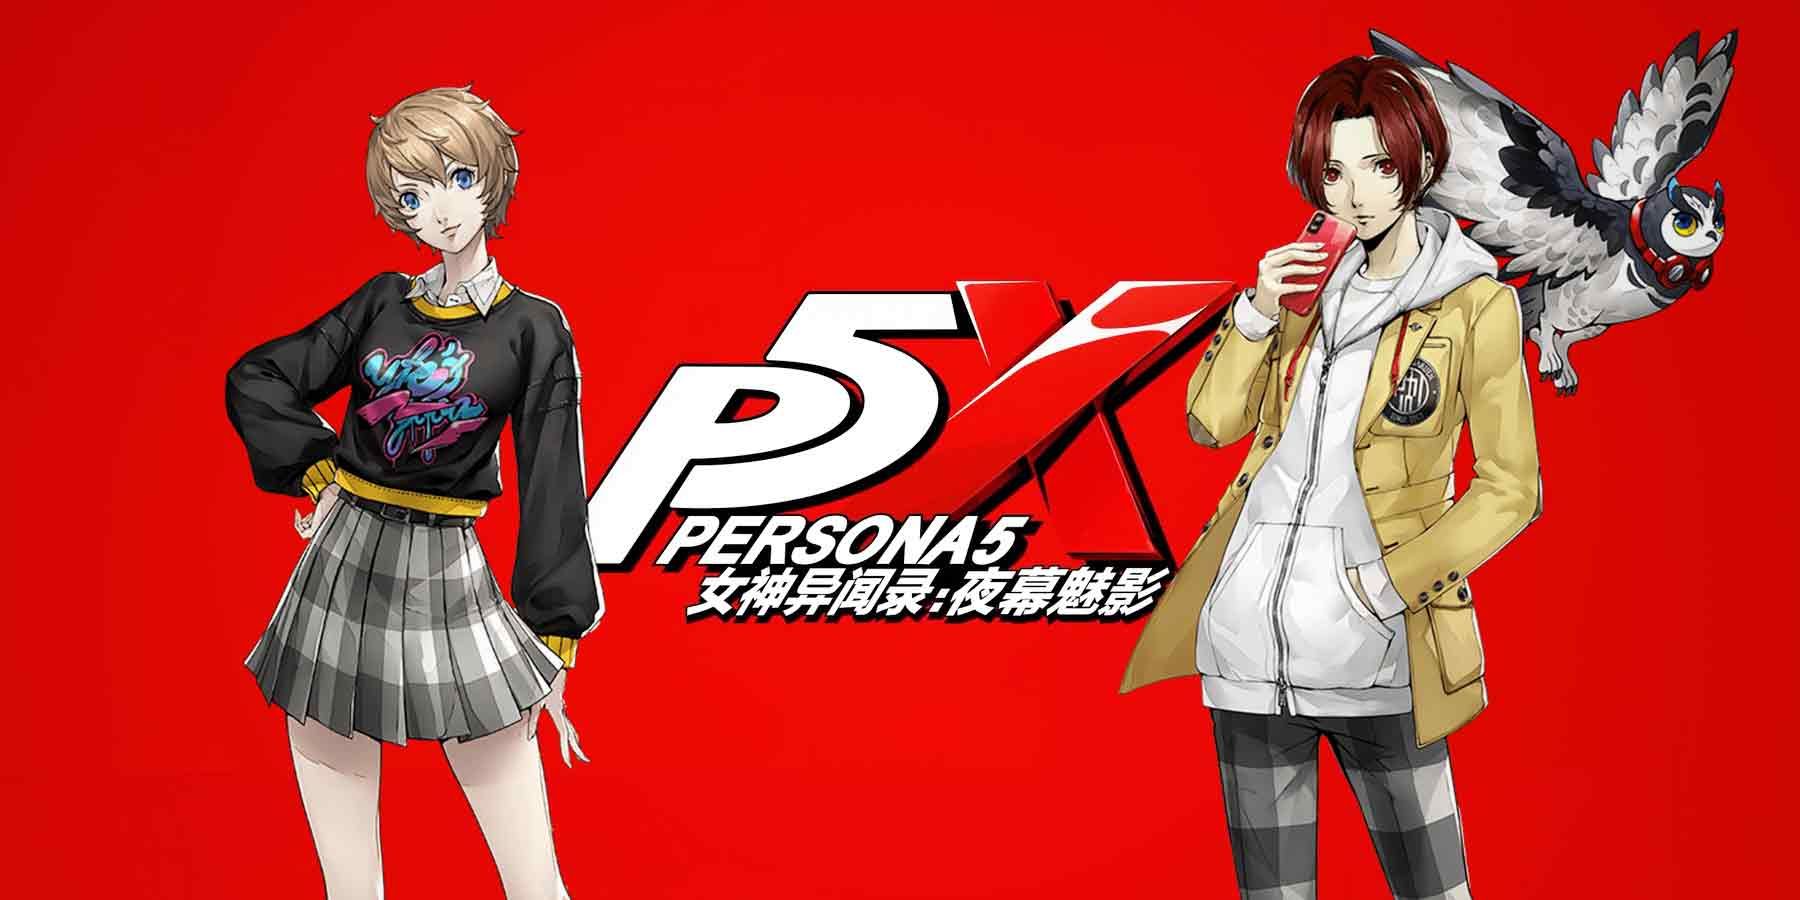 Persona 5 The Phantom X P5X character artwork with game logo composite red background